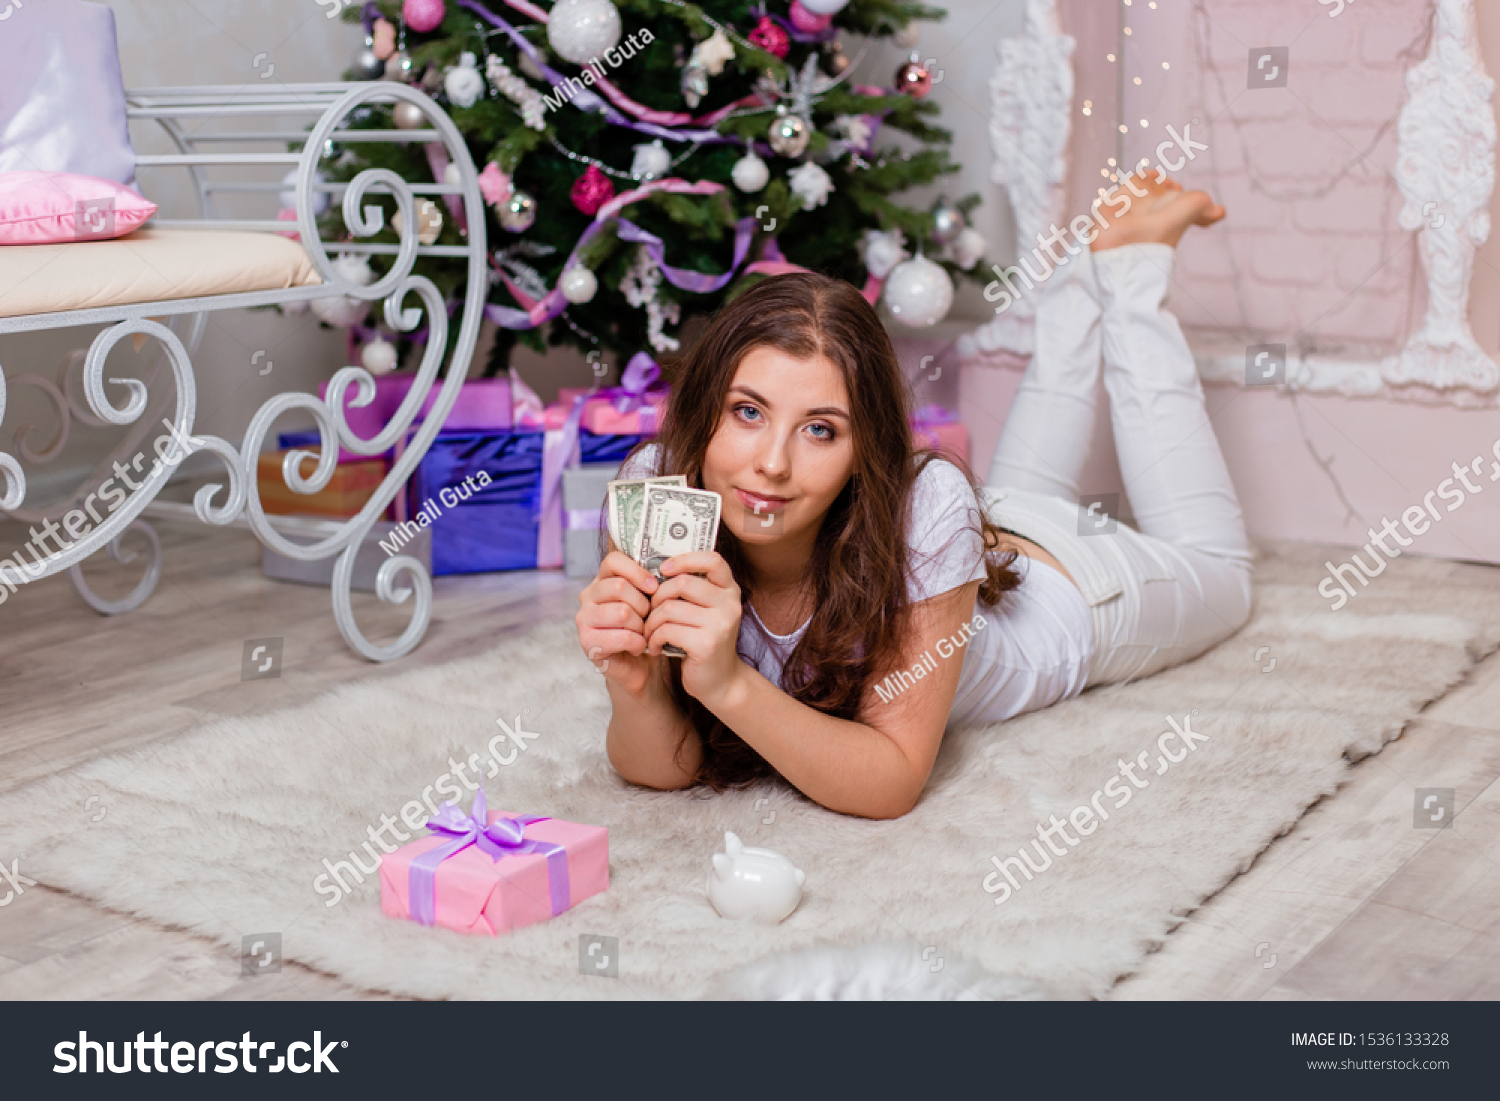 An attractive girl in a white T-shirt lies on her stomach on a fluffy fur rug with dollars in her hands next to a gift and a piggy bank near the fireplace and Christmas tree. #1536133328